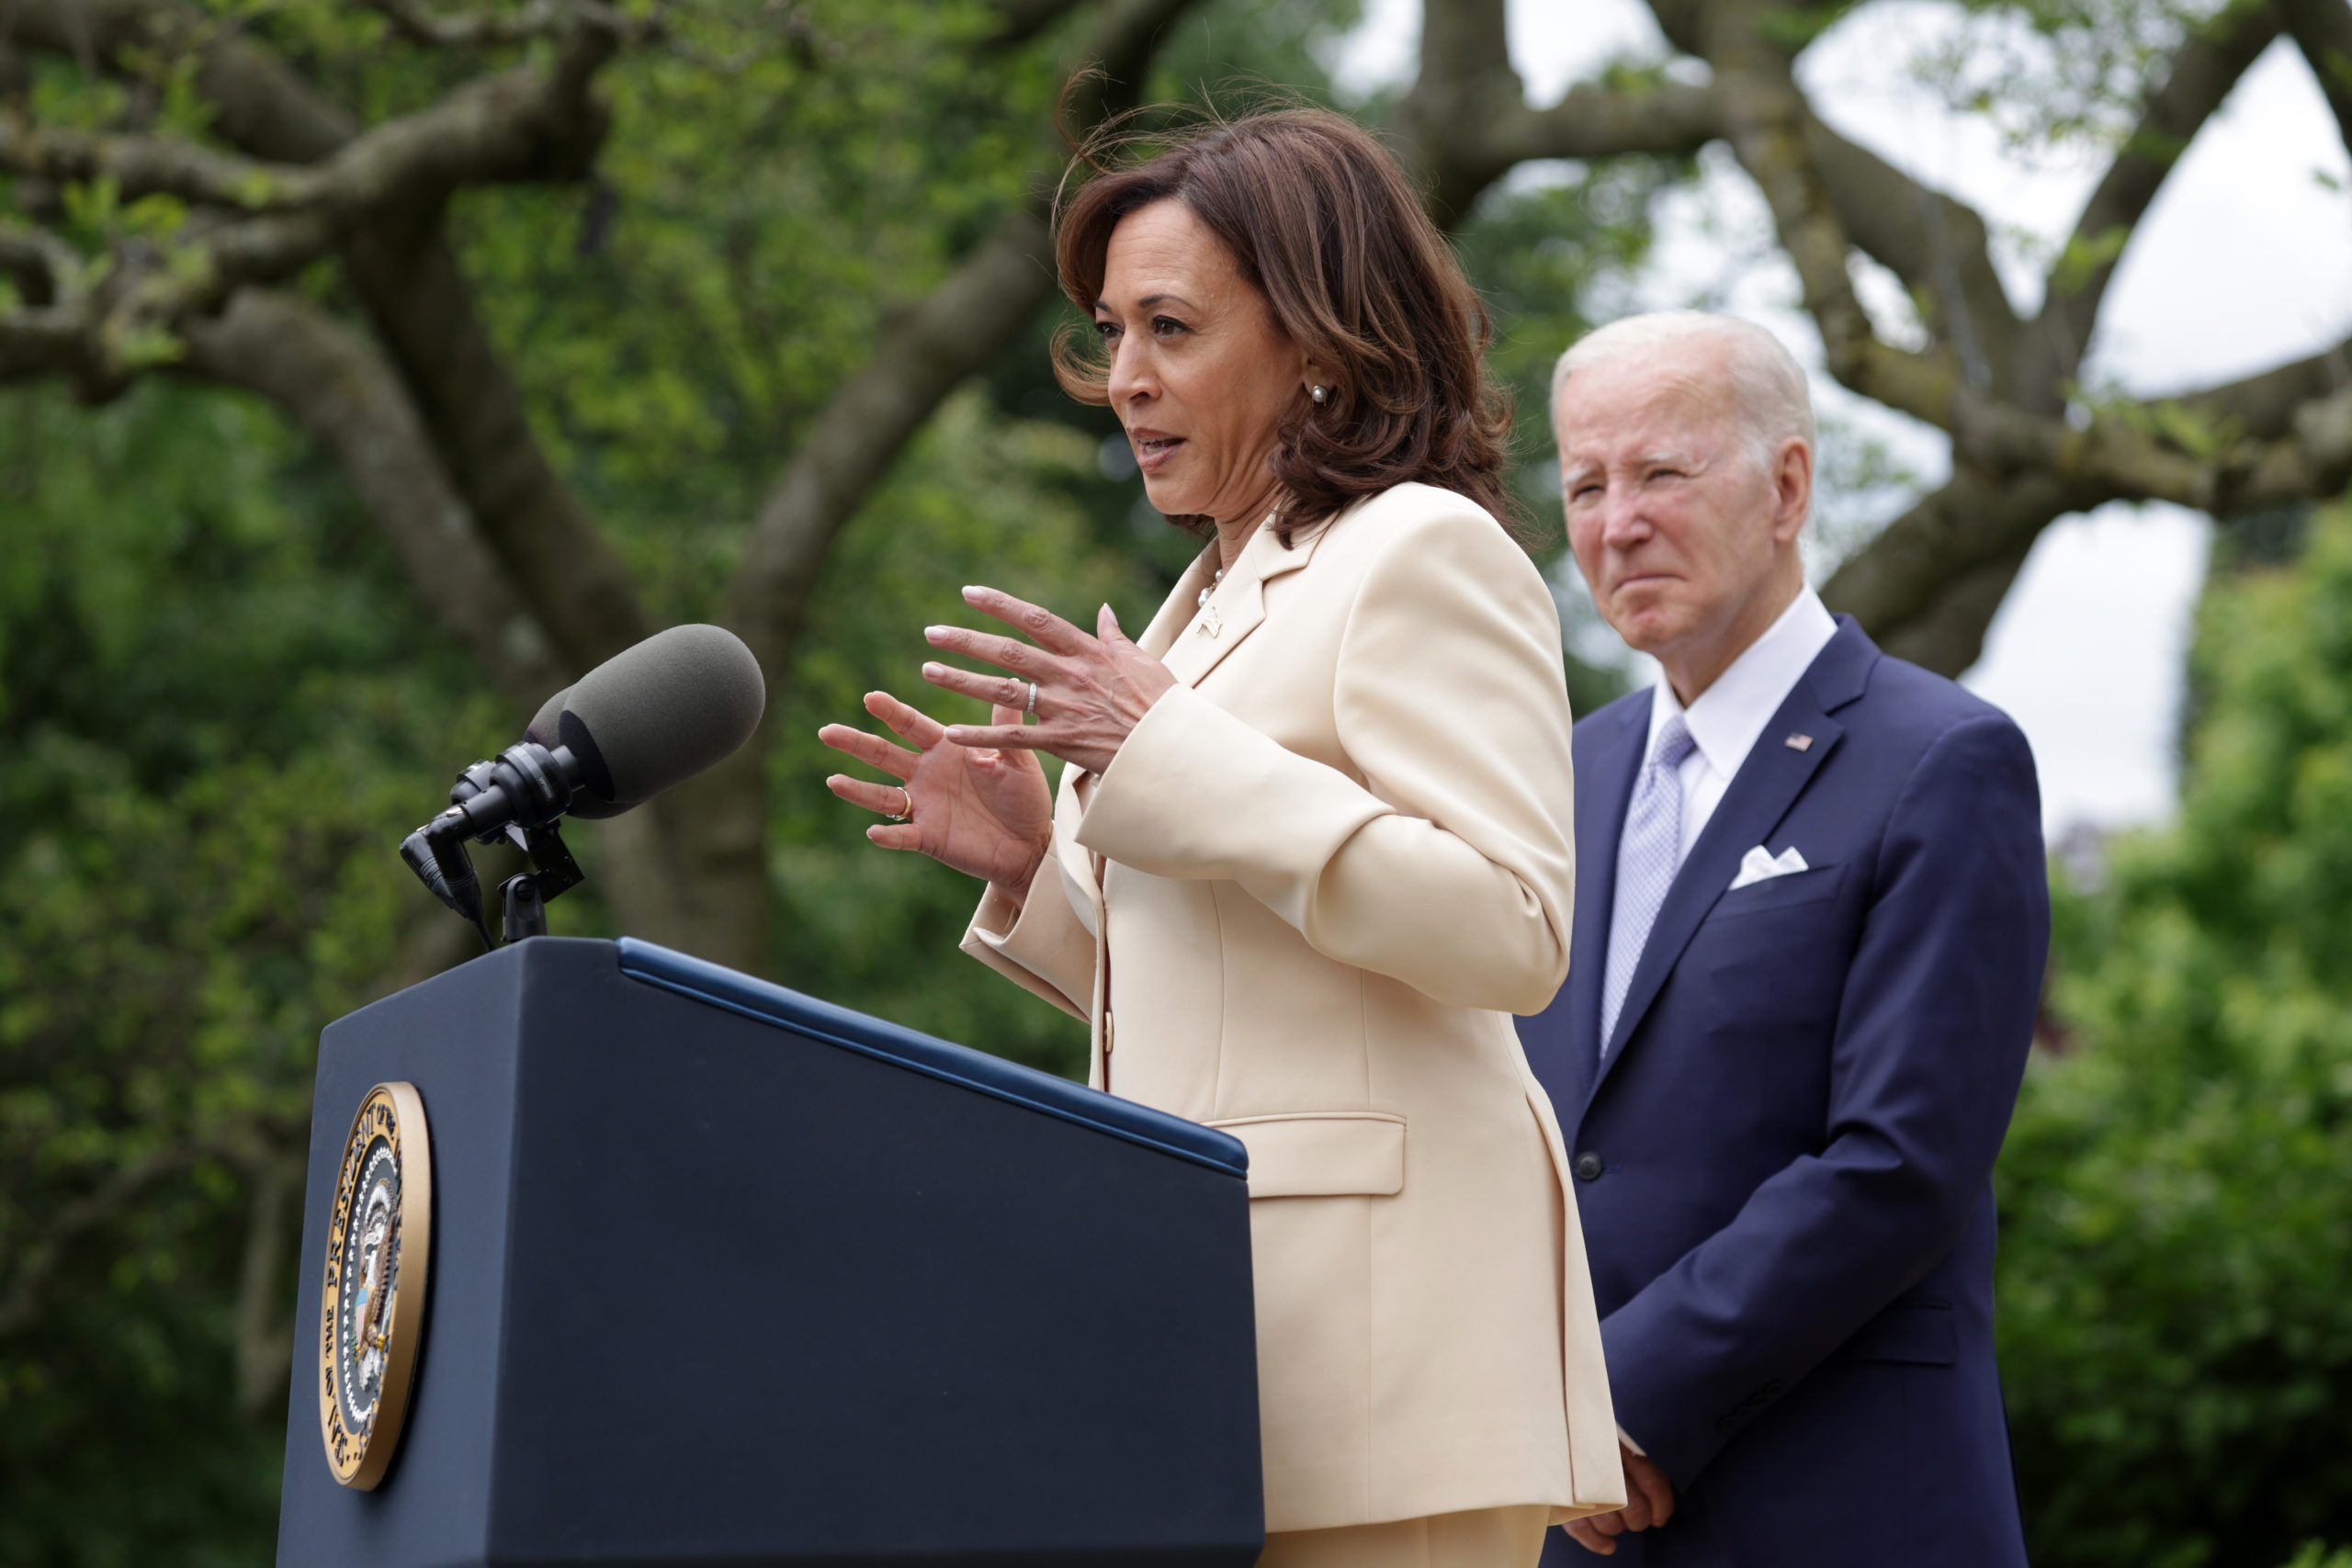 U.S. Vice President Kamala Harris (L) speaks as President Joe Biden (R) listens during a Rose Garden event at the White House to mark National Small Business Week on May 1, 2023 in Washington, DC. President Biden is hosting small business award winners at the White House to celebrate their contributions. (Photo by Alex Wong/Getty Images)